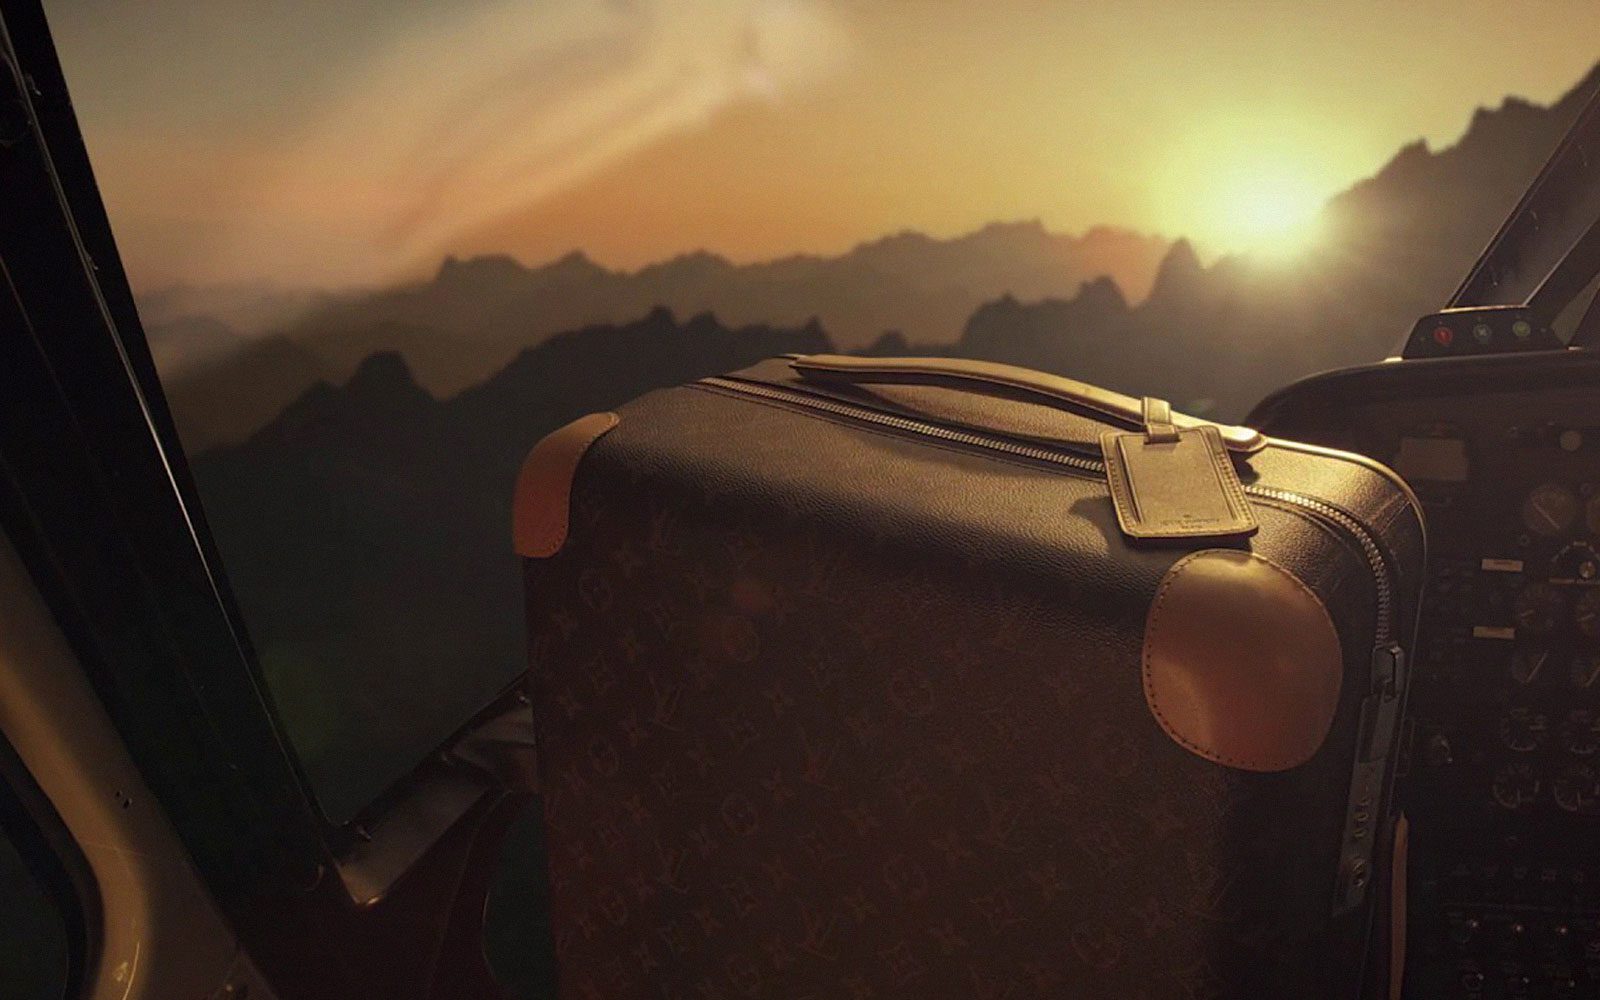 The Art of Packing promo by Louis Vuitton